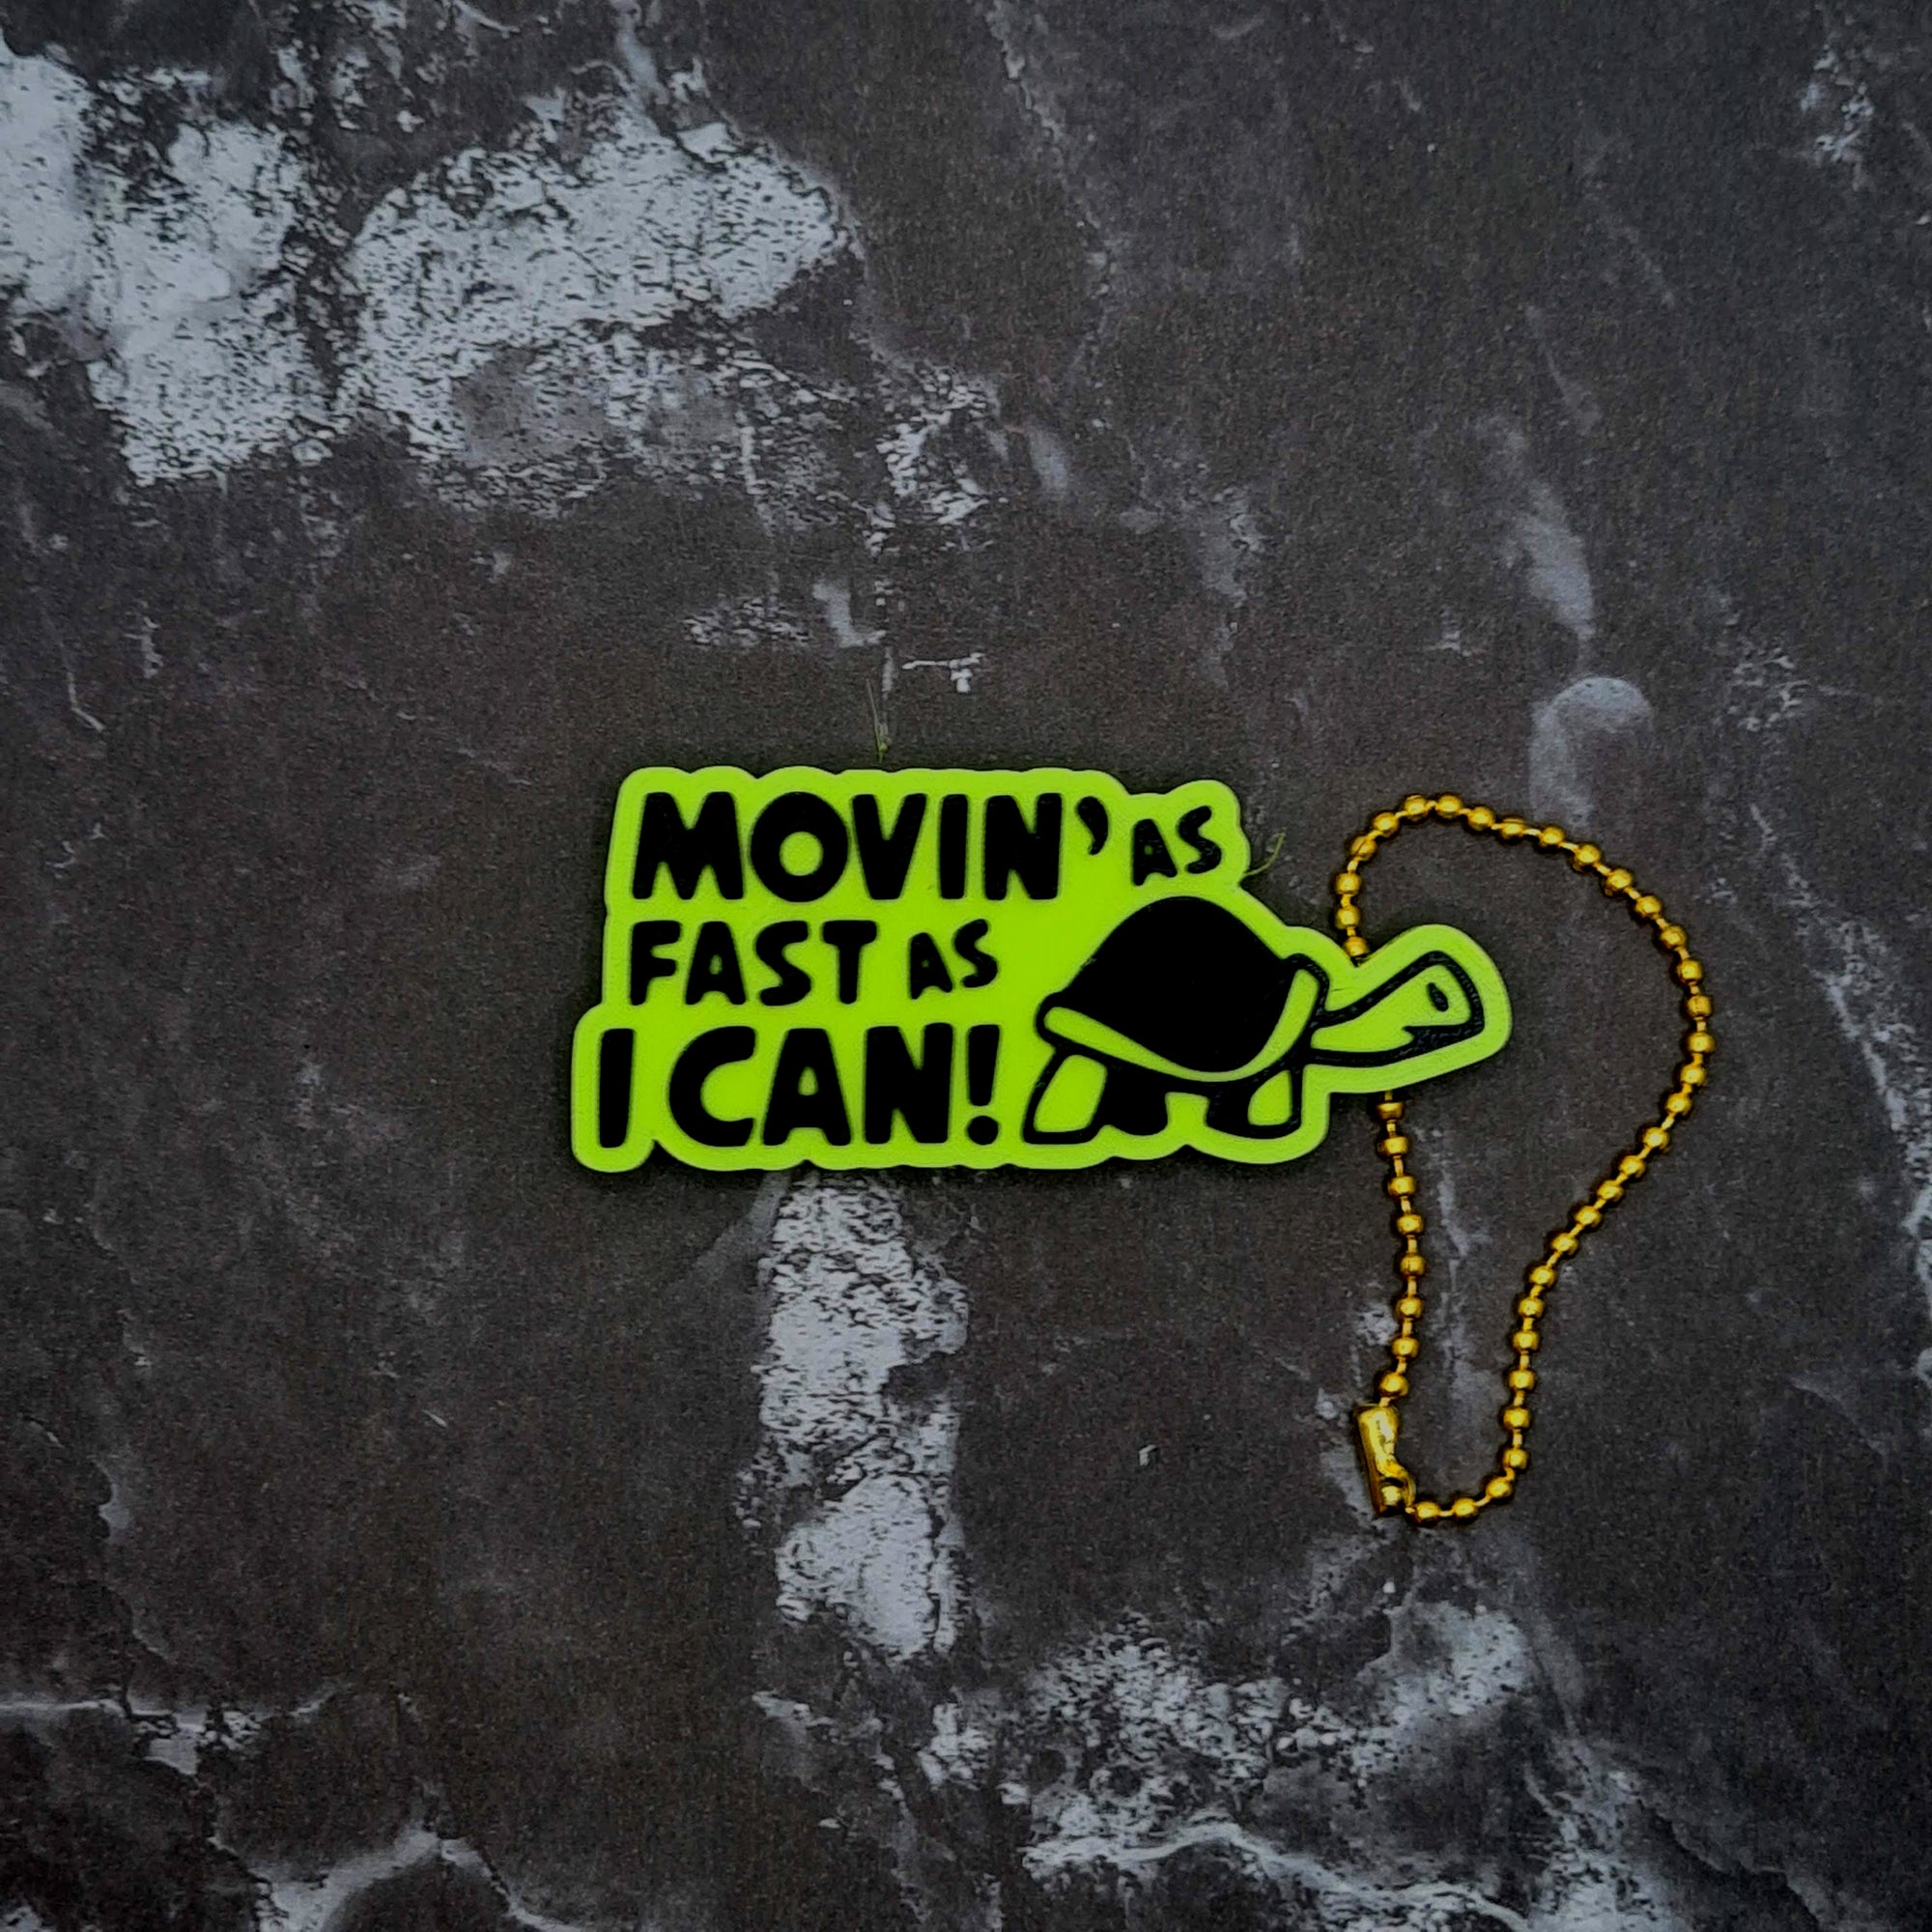 Movin' as Fast as I Can Keychain!